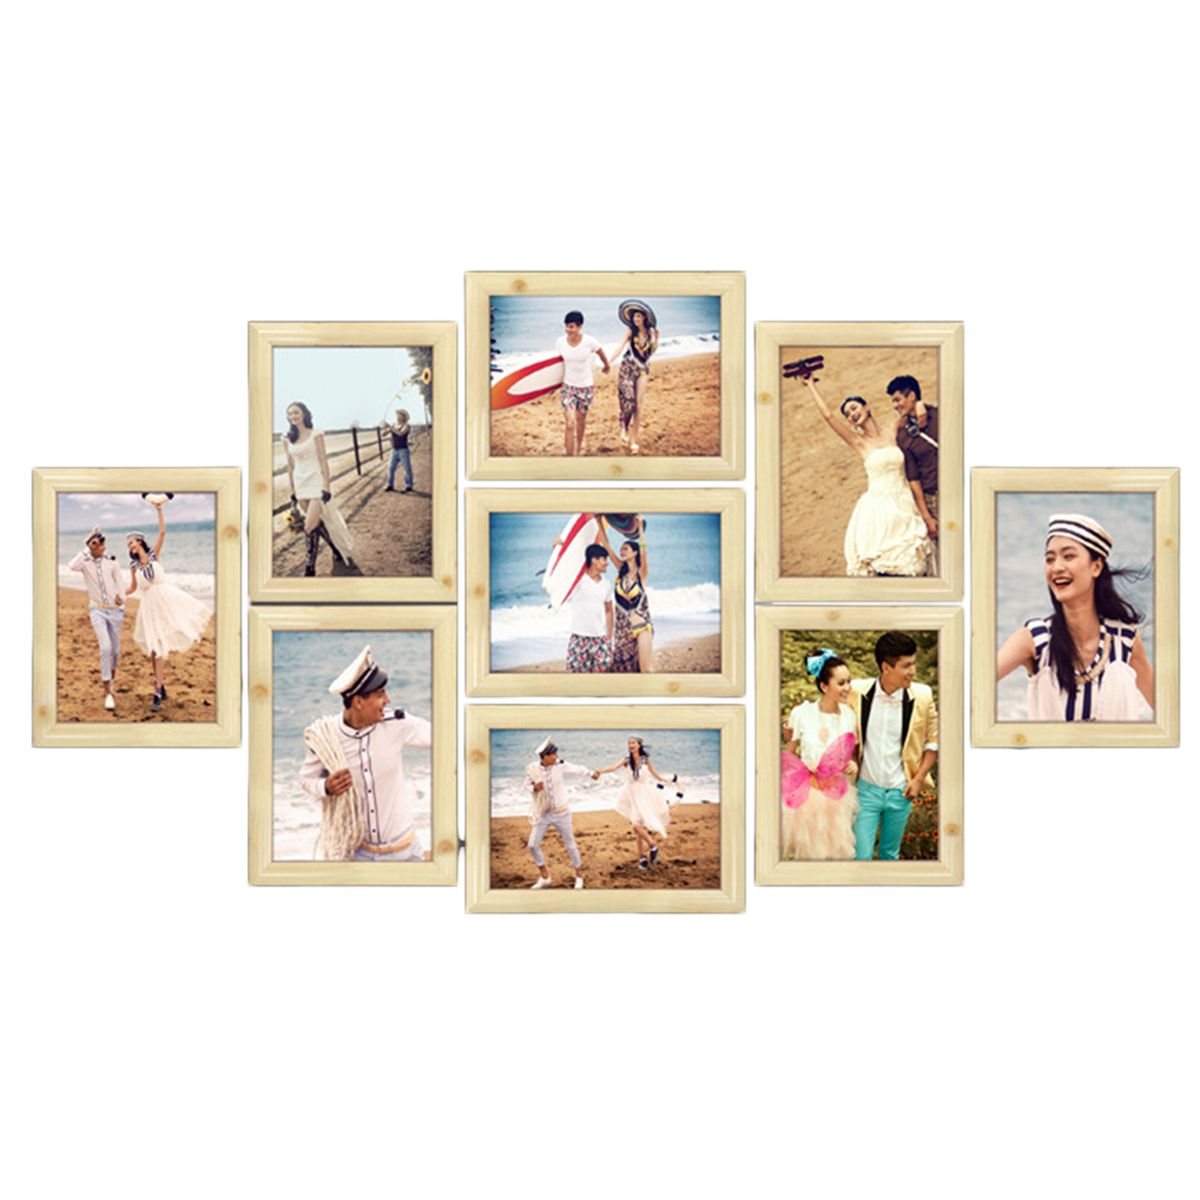 DIY-9PCS-Family-Collage-Wedding-Photo-Picture-Frame-Wall-Hanging-Display-Home-Decorations-1557878